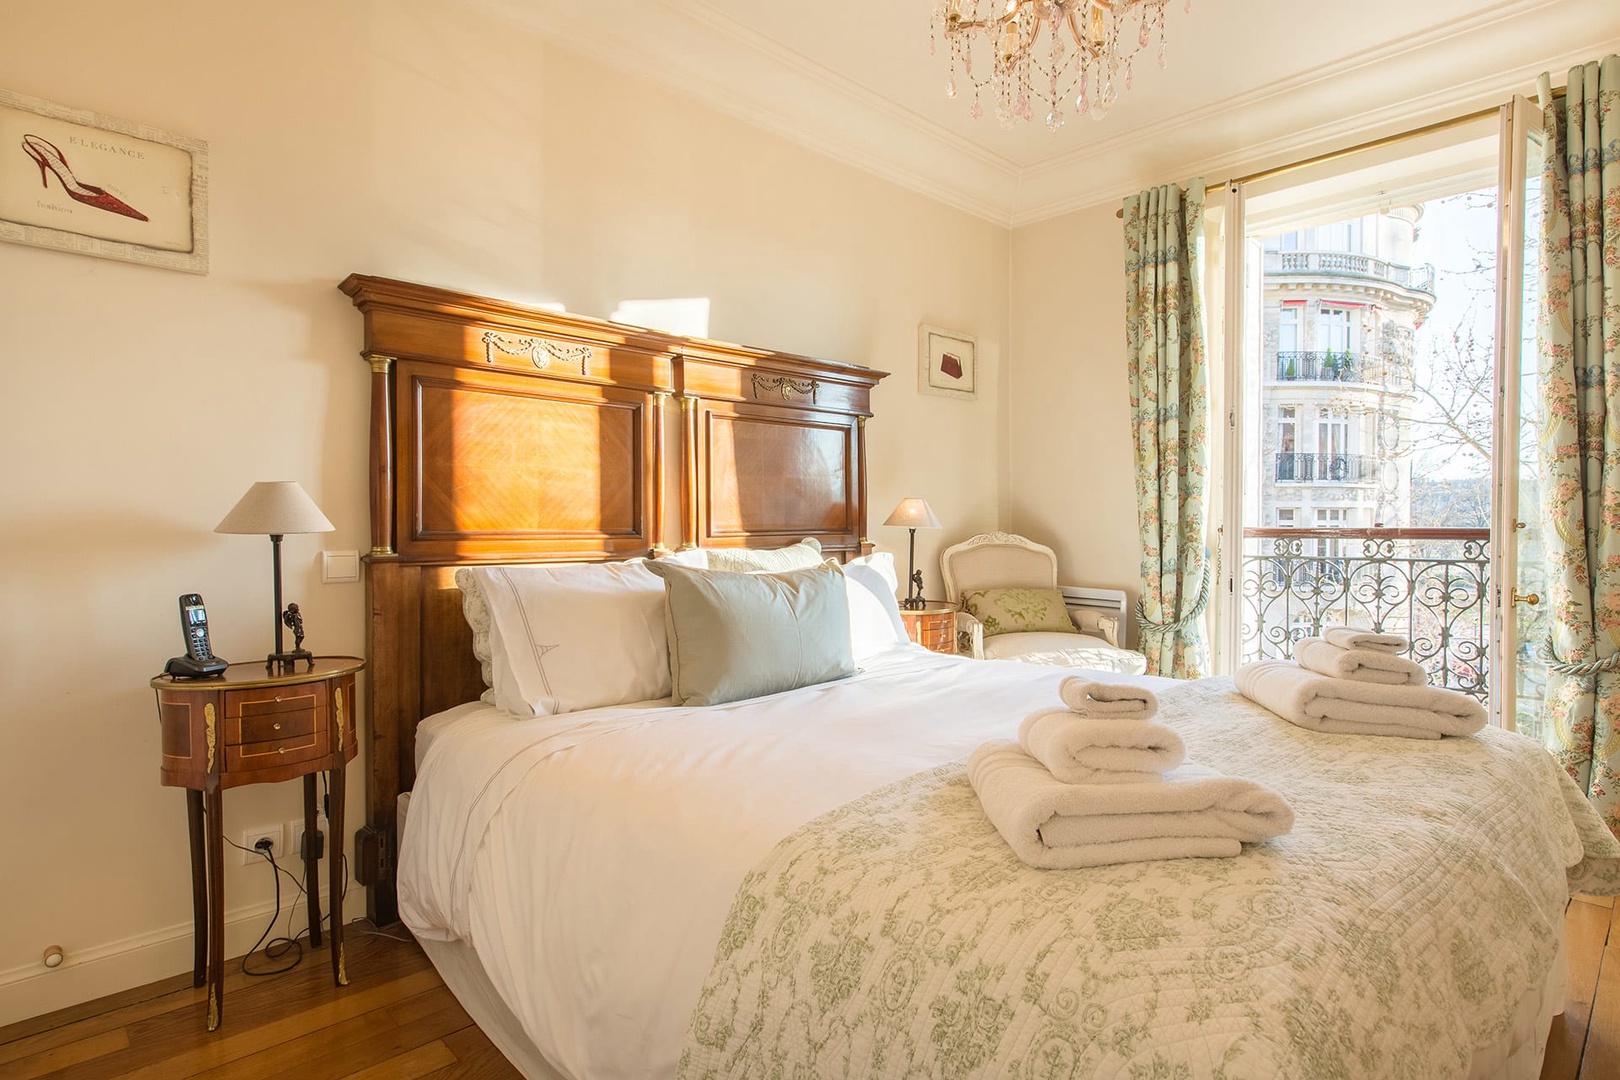 Wake up to the Paris sun in beautiful bedroom 1.